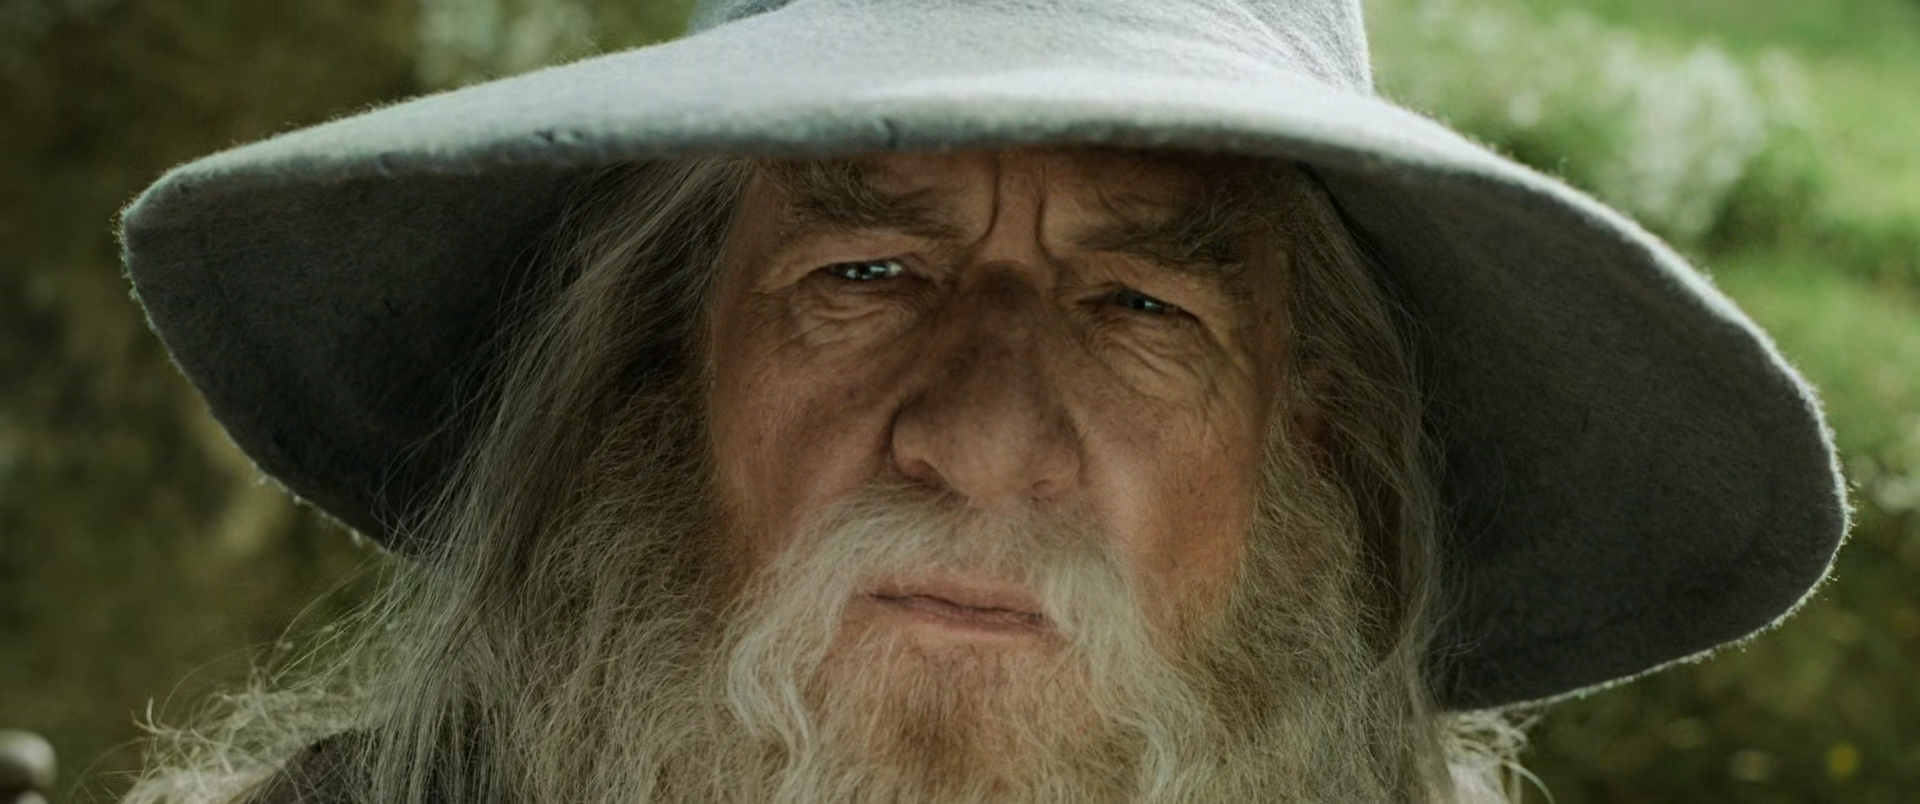 Gandalf: "A wizard is never late" Blank Meme Template